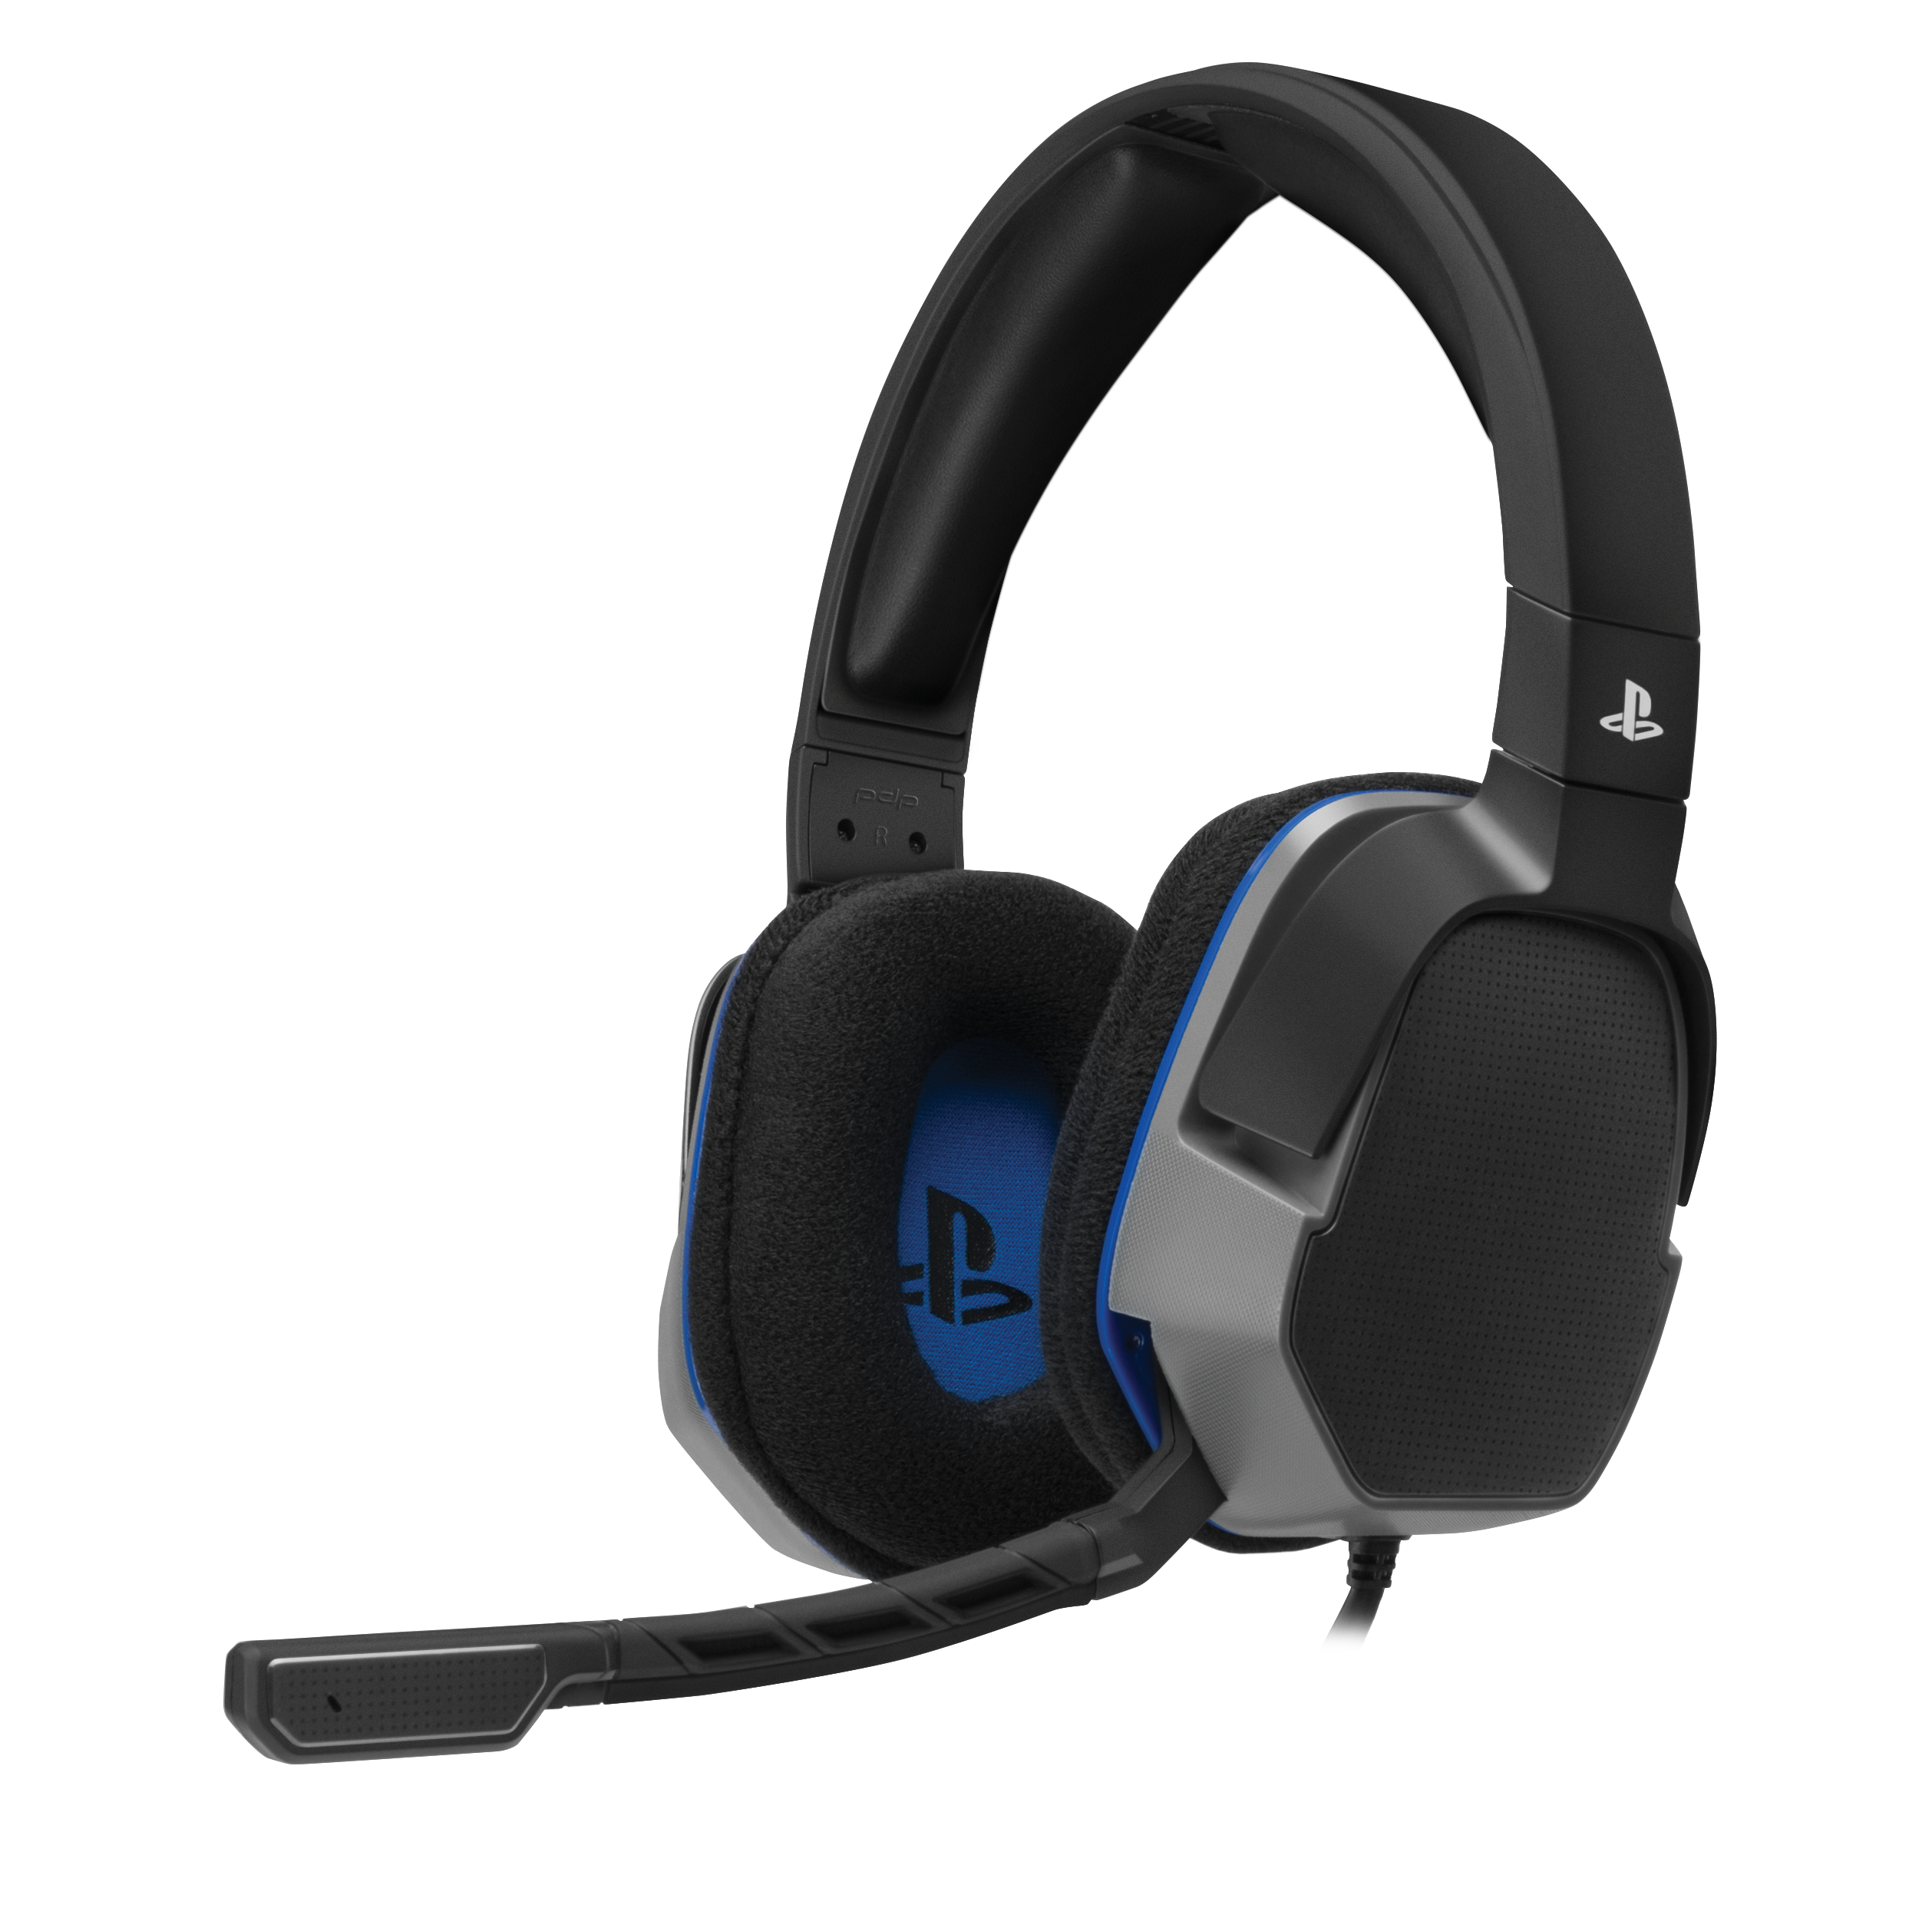 how to use headset in ps4